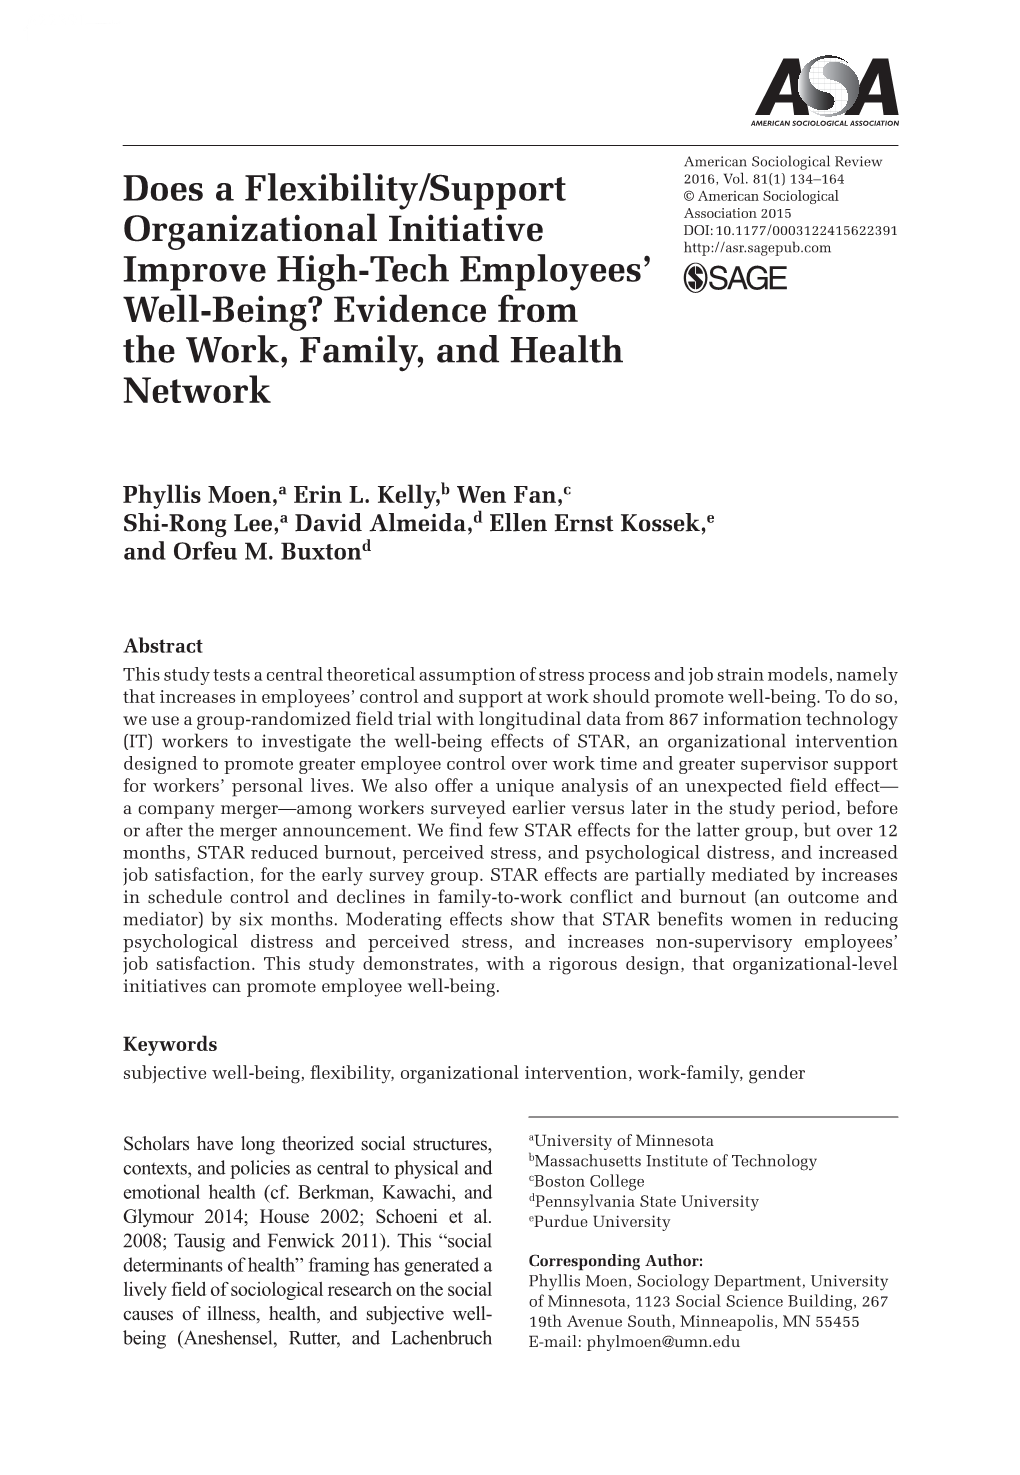 Does a Flexibility/Support Organizational Initiative Improve High-Tech Employees' Well-Being? Evidence from the Work, Family